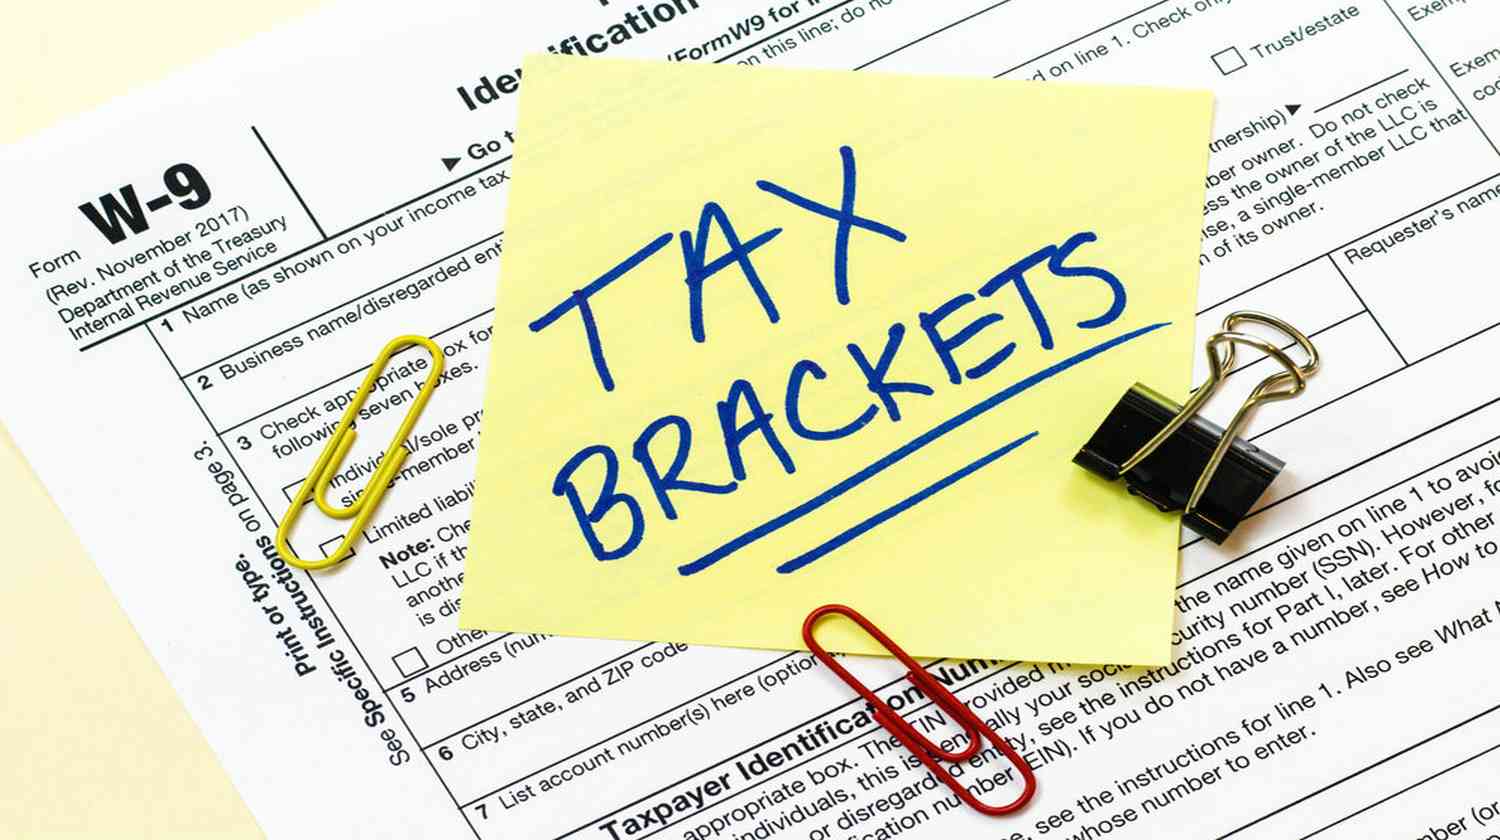 Featured | form with sticky note | Federal Tax Bracket | Frequently Asked Questions